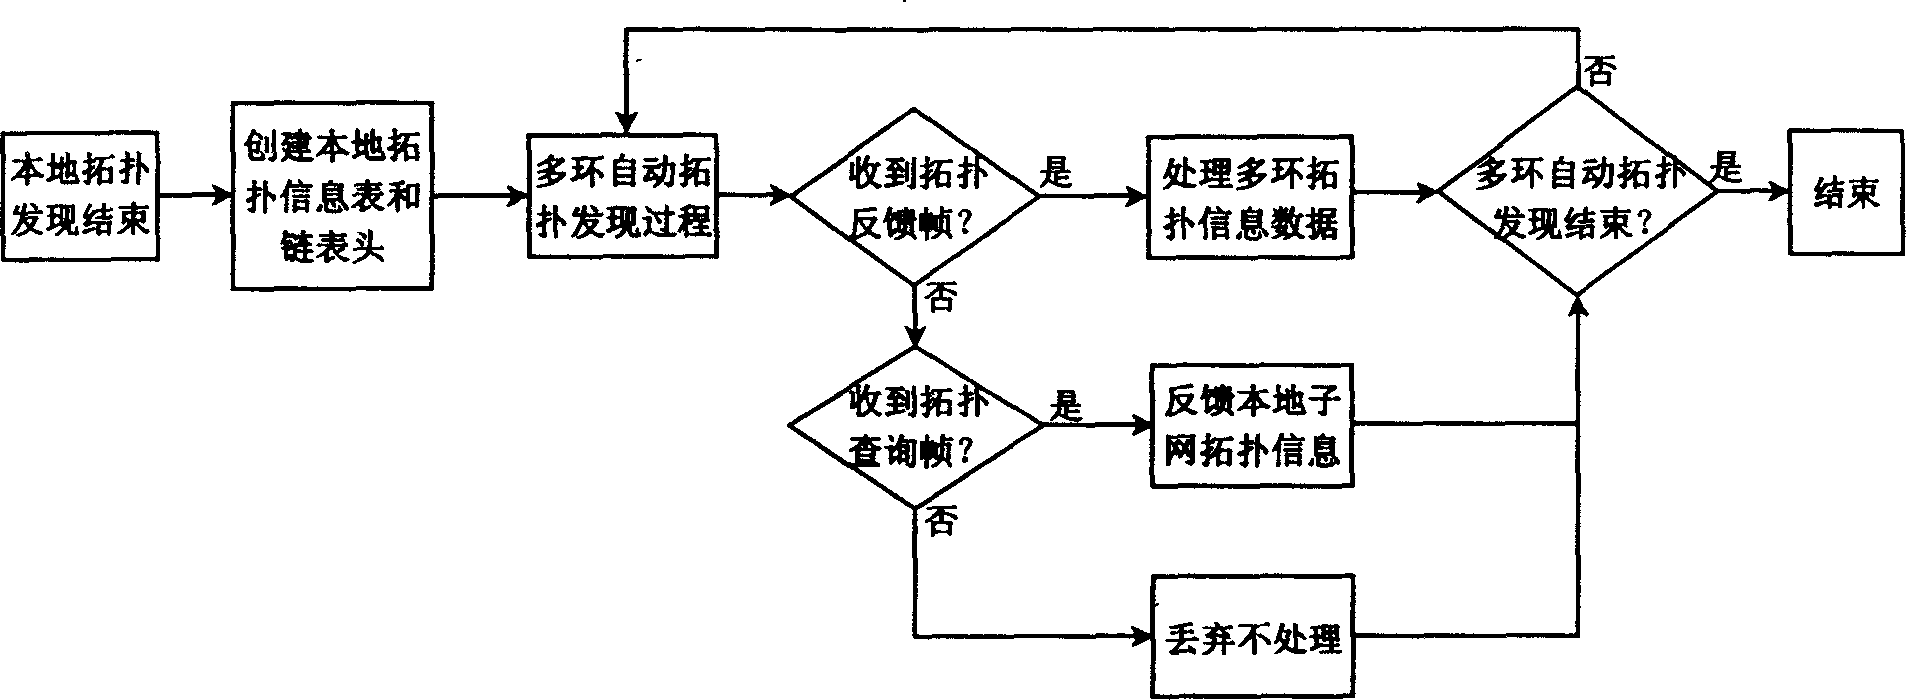 Implement method for automatic topology discovery of resilient packet multi-ring interconnection network